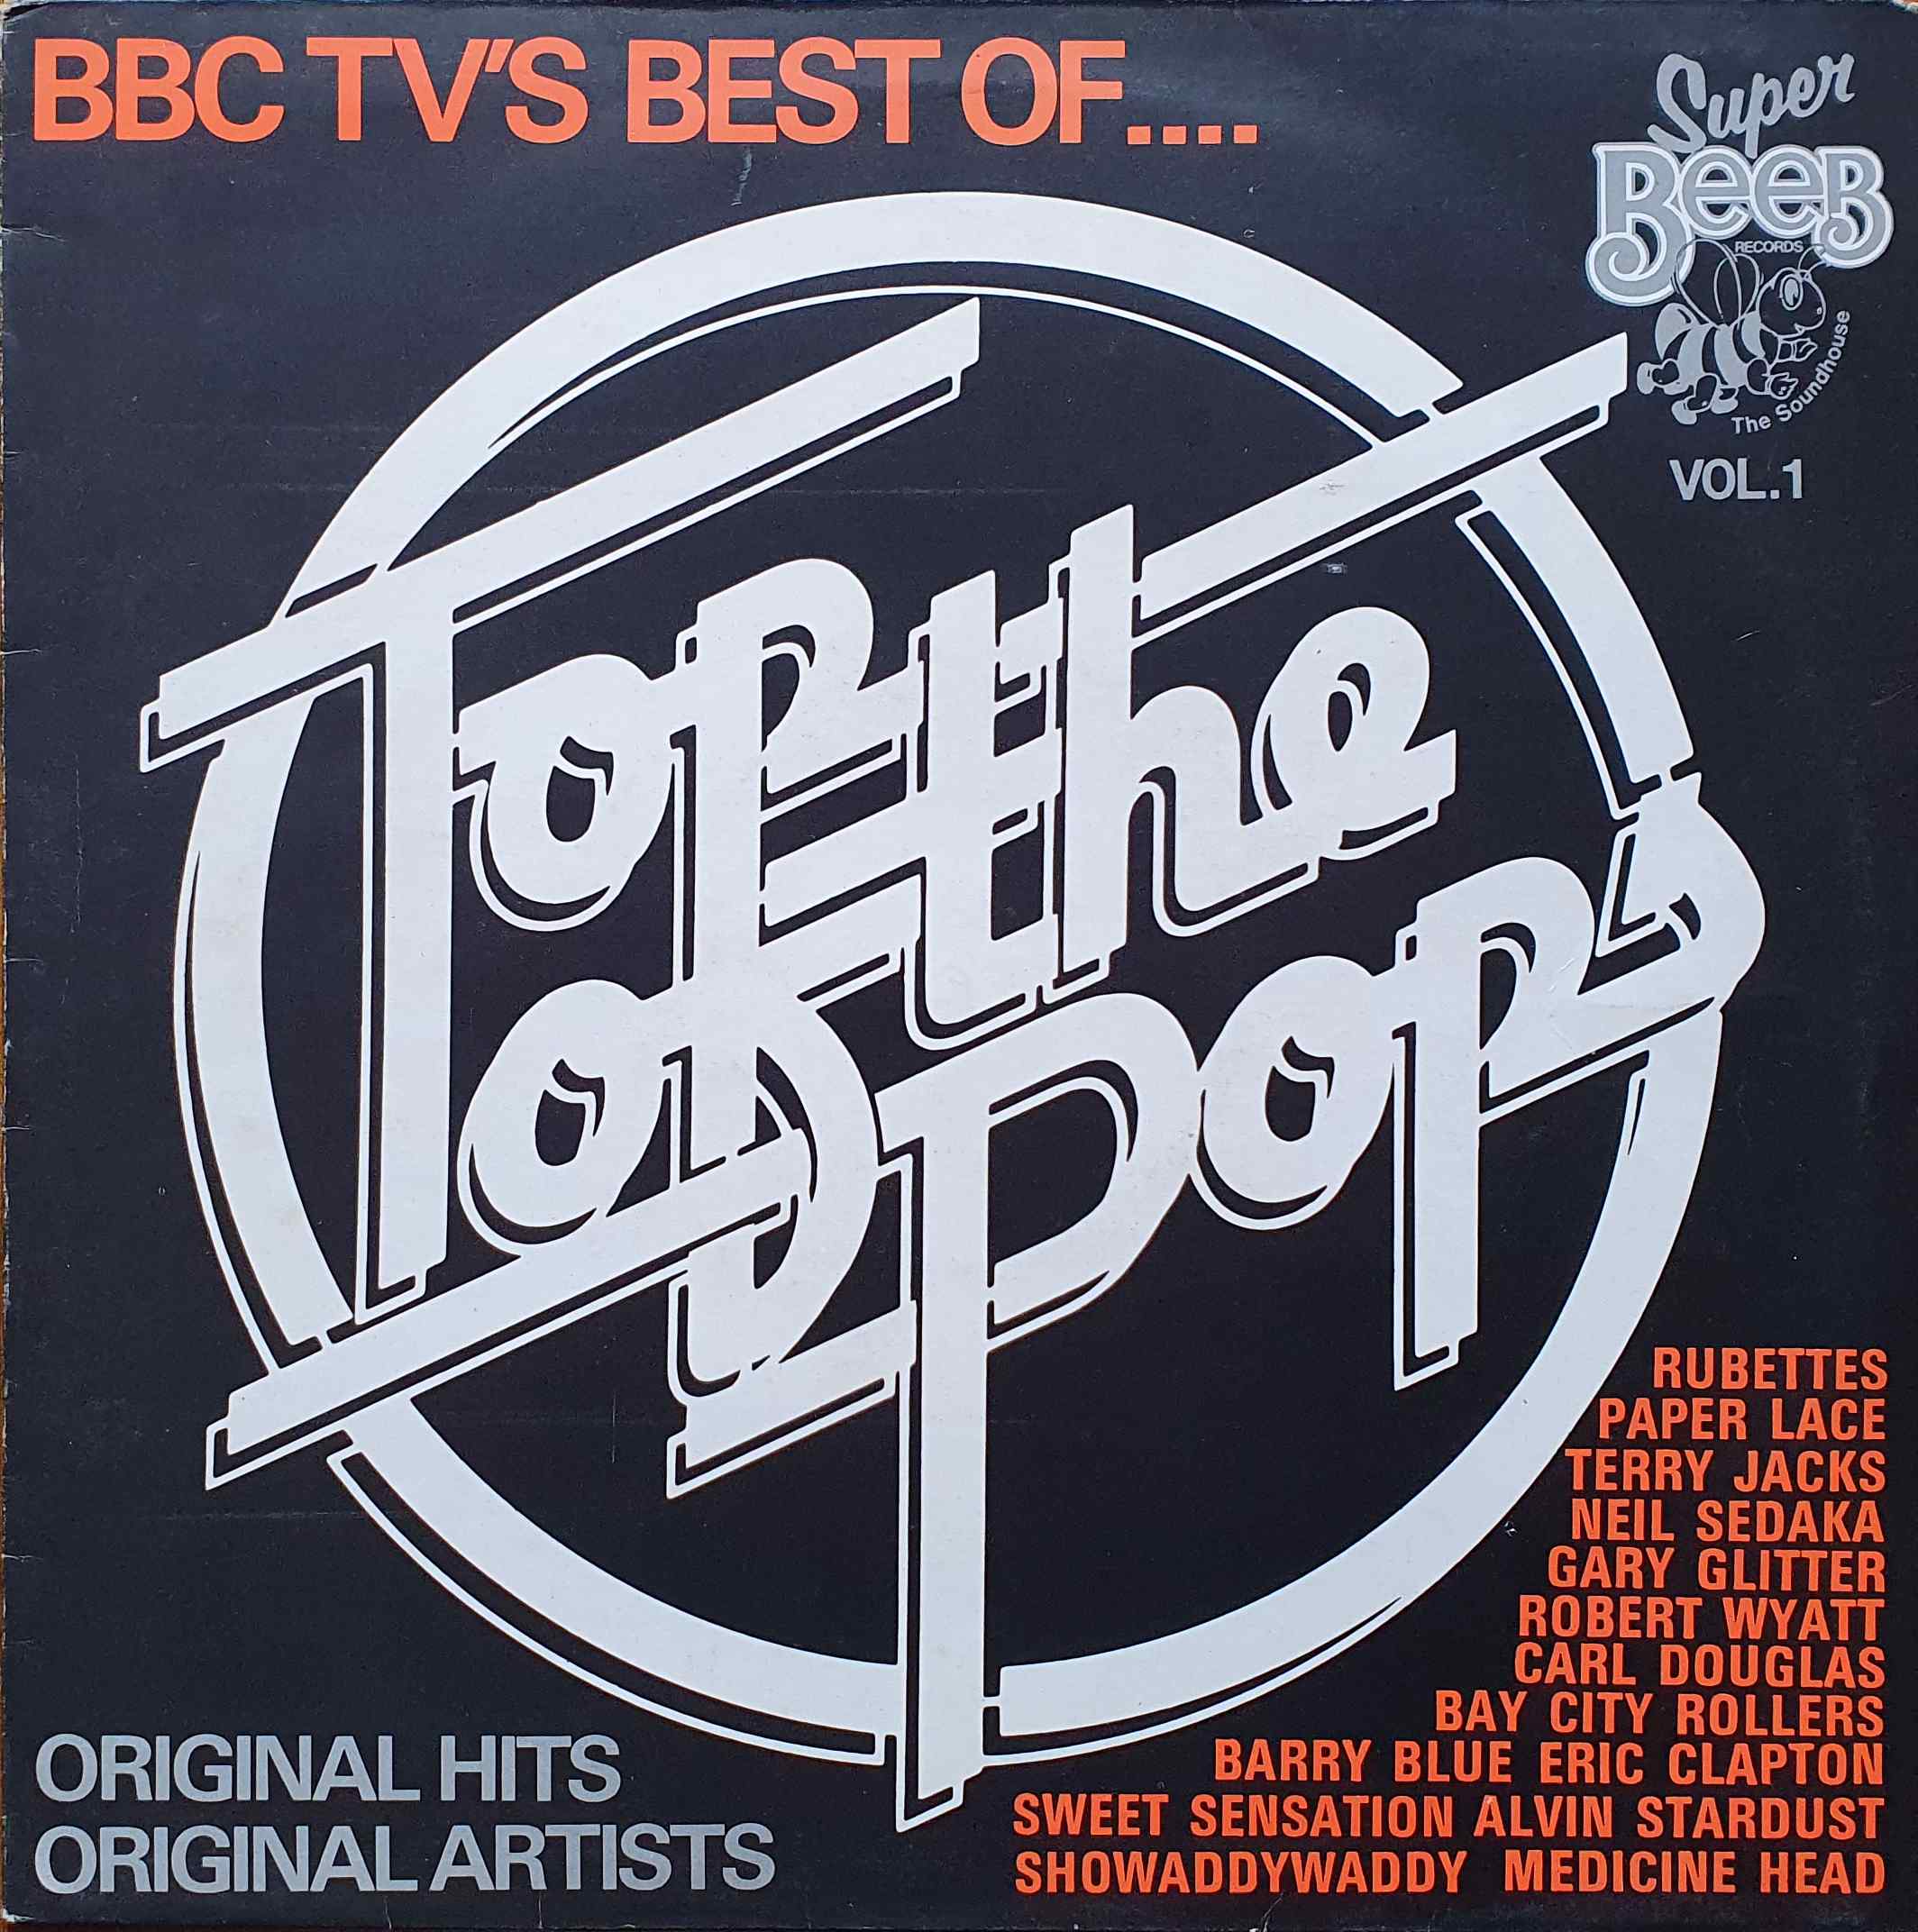 Picture of BELP 001 Best of top of the pops by artist Various from the BBC albums - Records and Tapes library